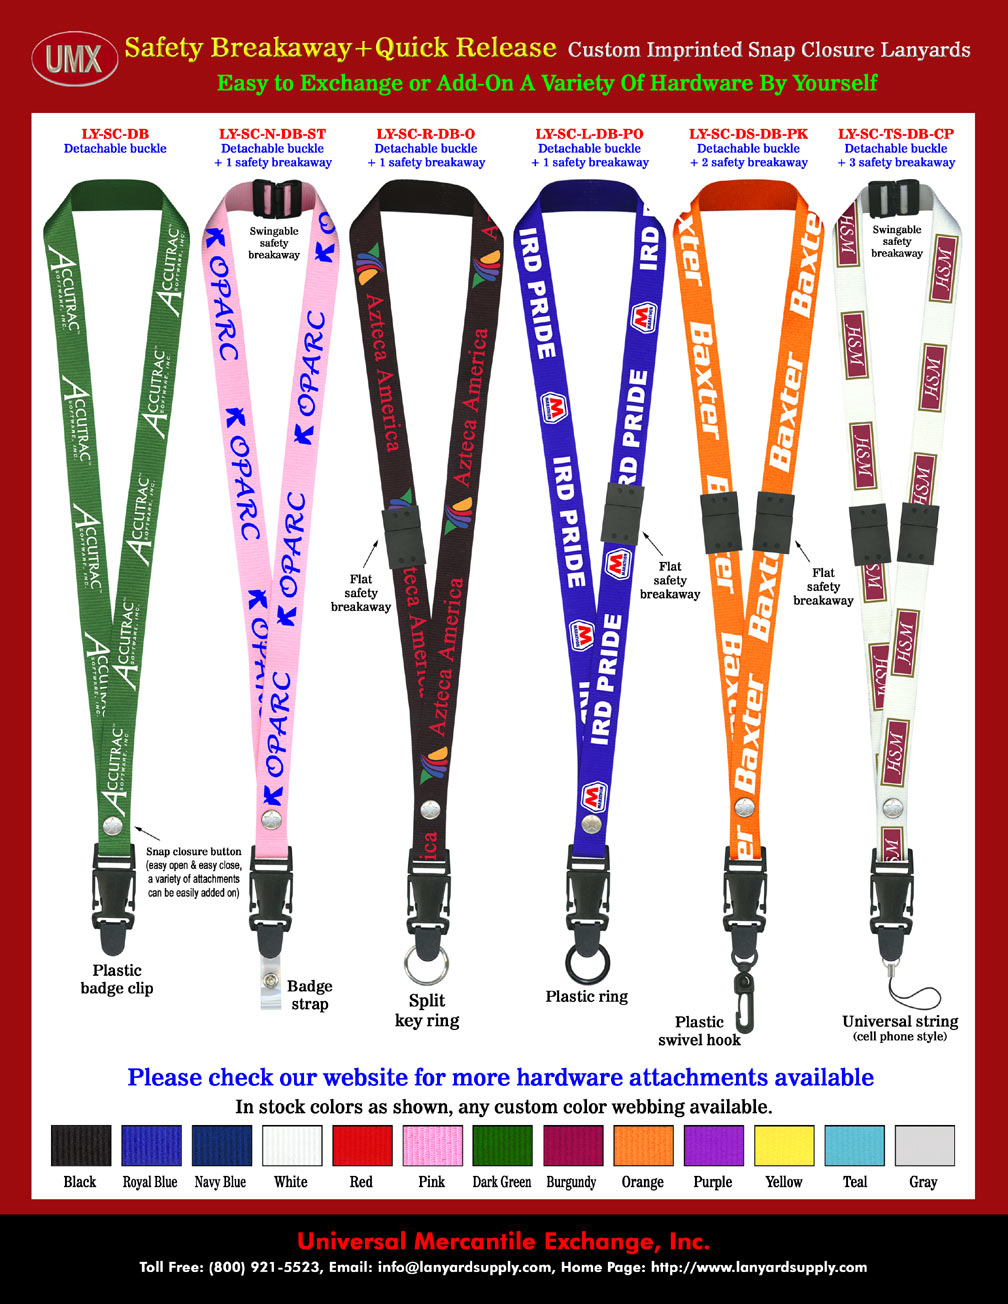 Custom Printed Quick Release and  Safety Breakaway Snap Closure Neck Lanyards - 3/4" Custom Imprinted Snap-On Neck Lanyards with Quick Release and Safety Breakaway With 13-Color Of Straps Available.